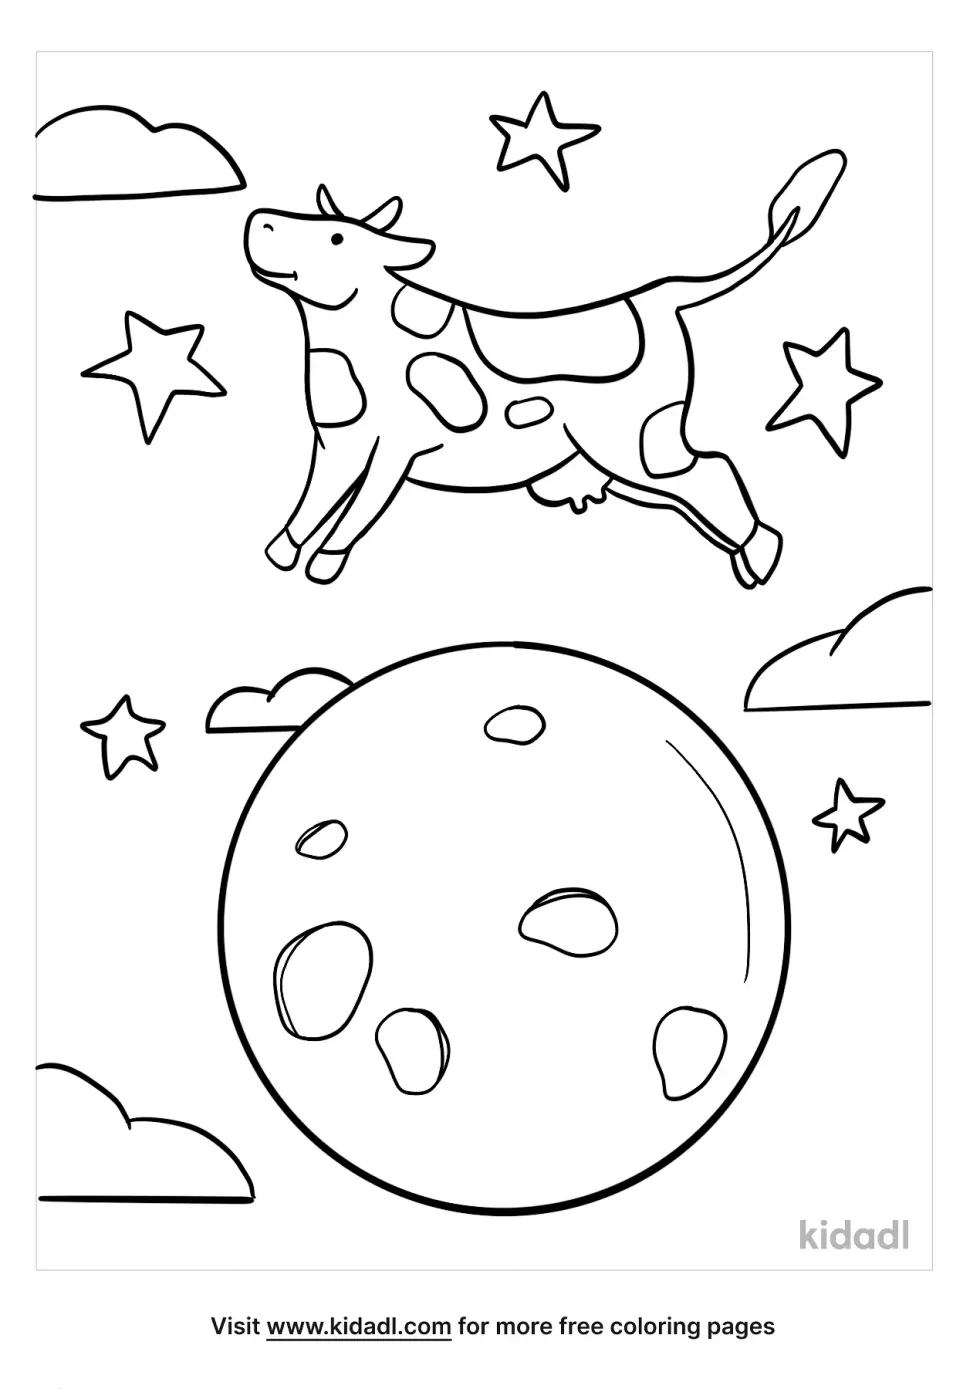 Cow Jumped Over The Moon